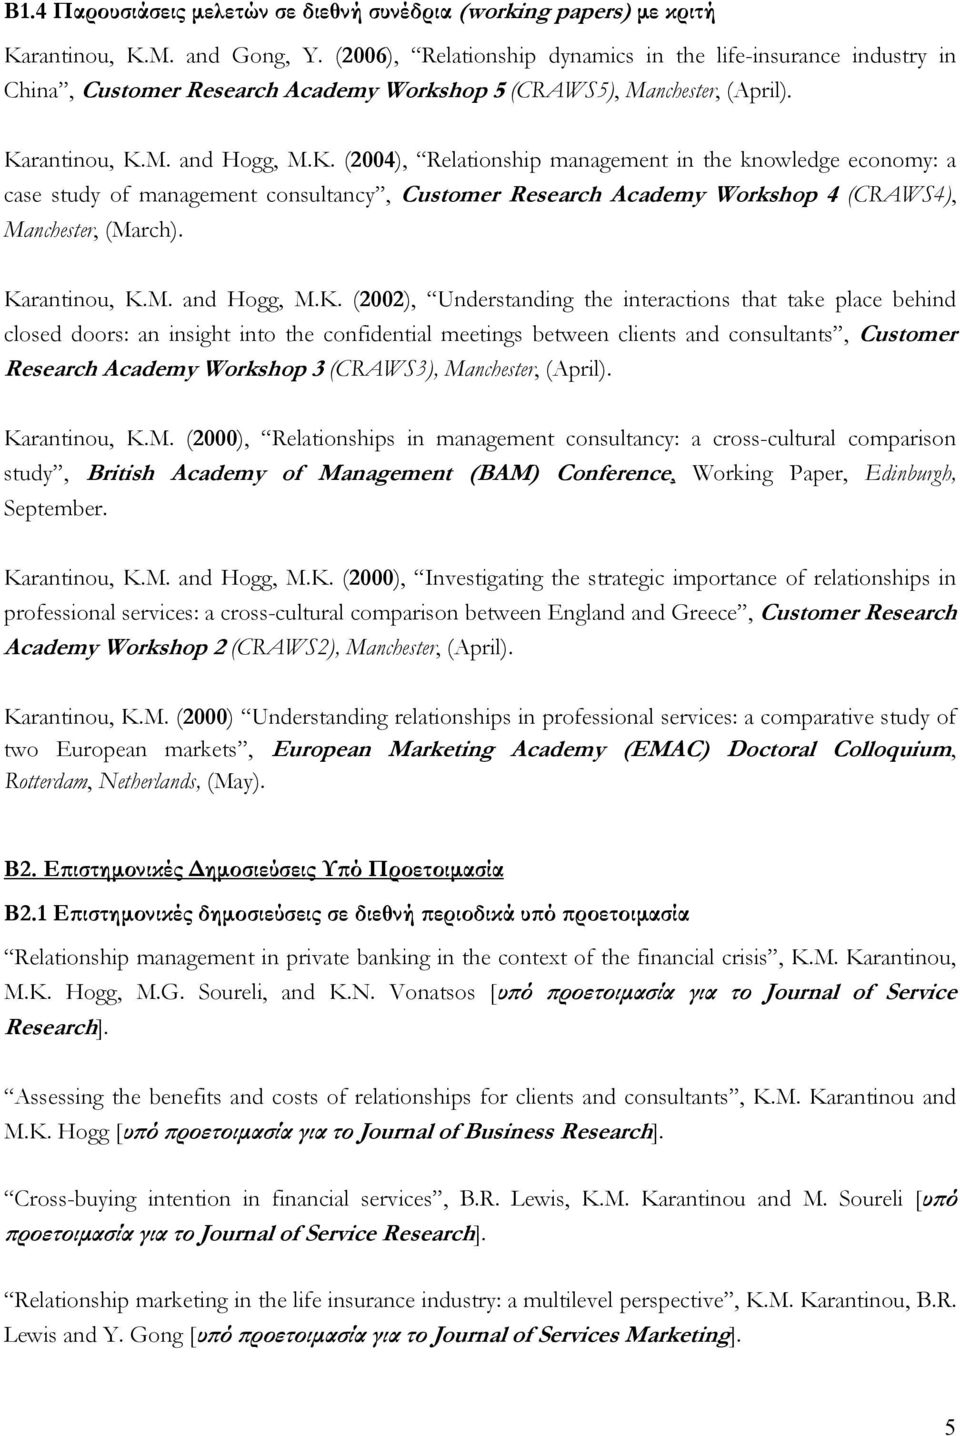 rantinou, K.M. and Hogg, M.K. (2004), Relationship management in the knowledge economy: a case study of management consultancy, Customer Research Academy Workshop 4 (CRAWS4), Manchester, (March).